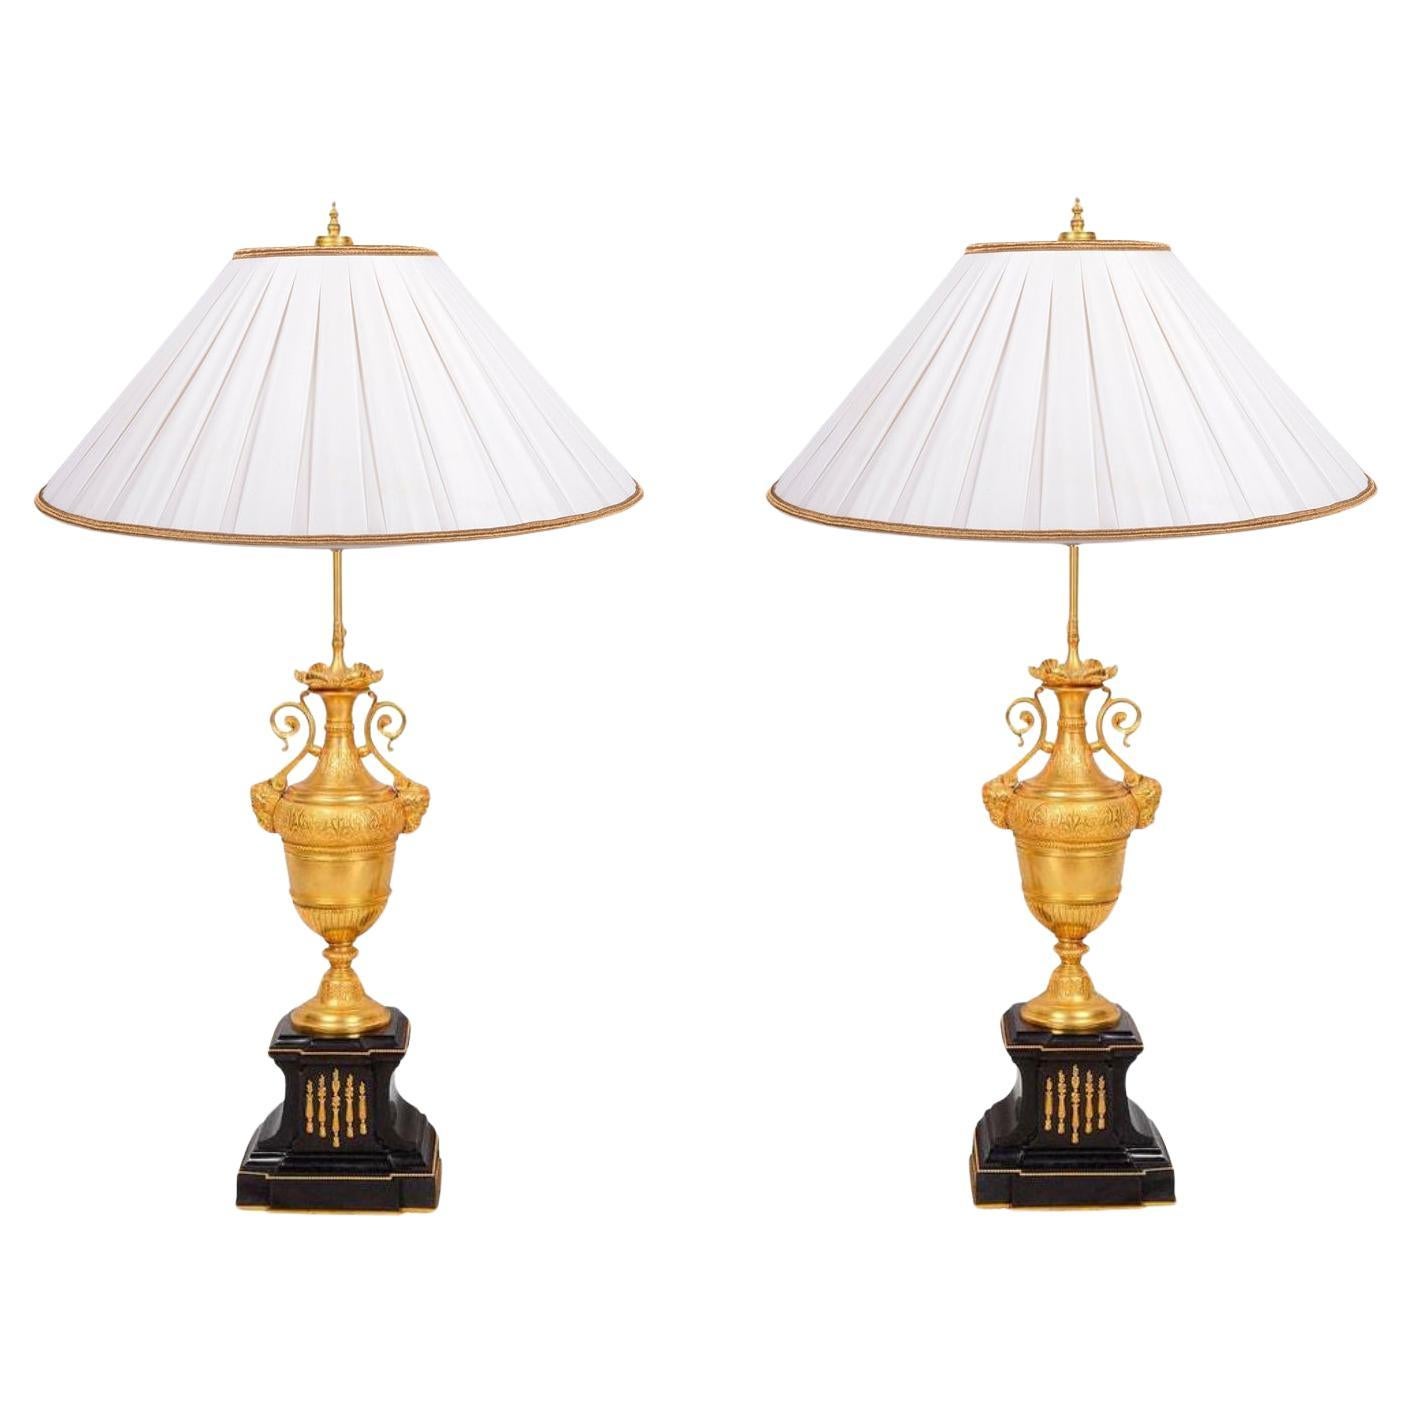 Pair of Classical 19th Century Gilded Lamps